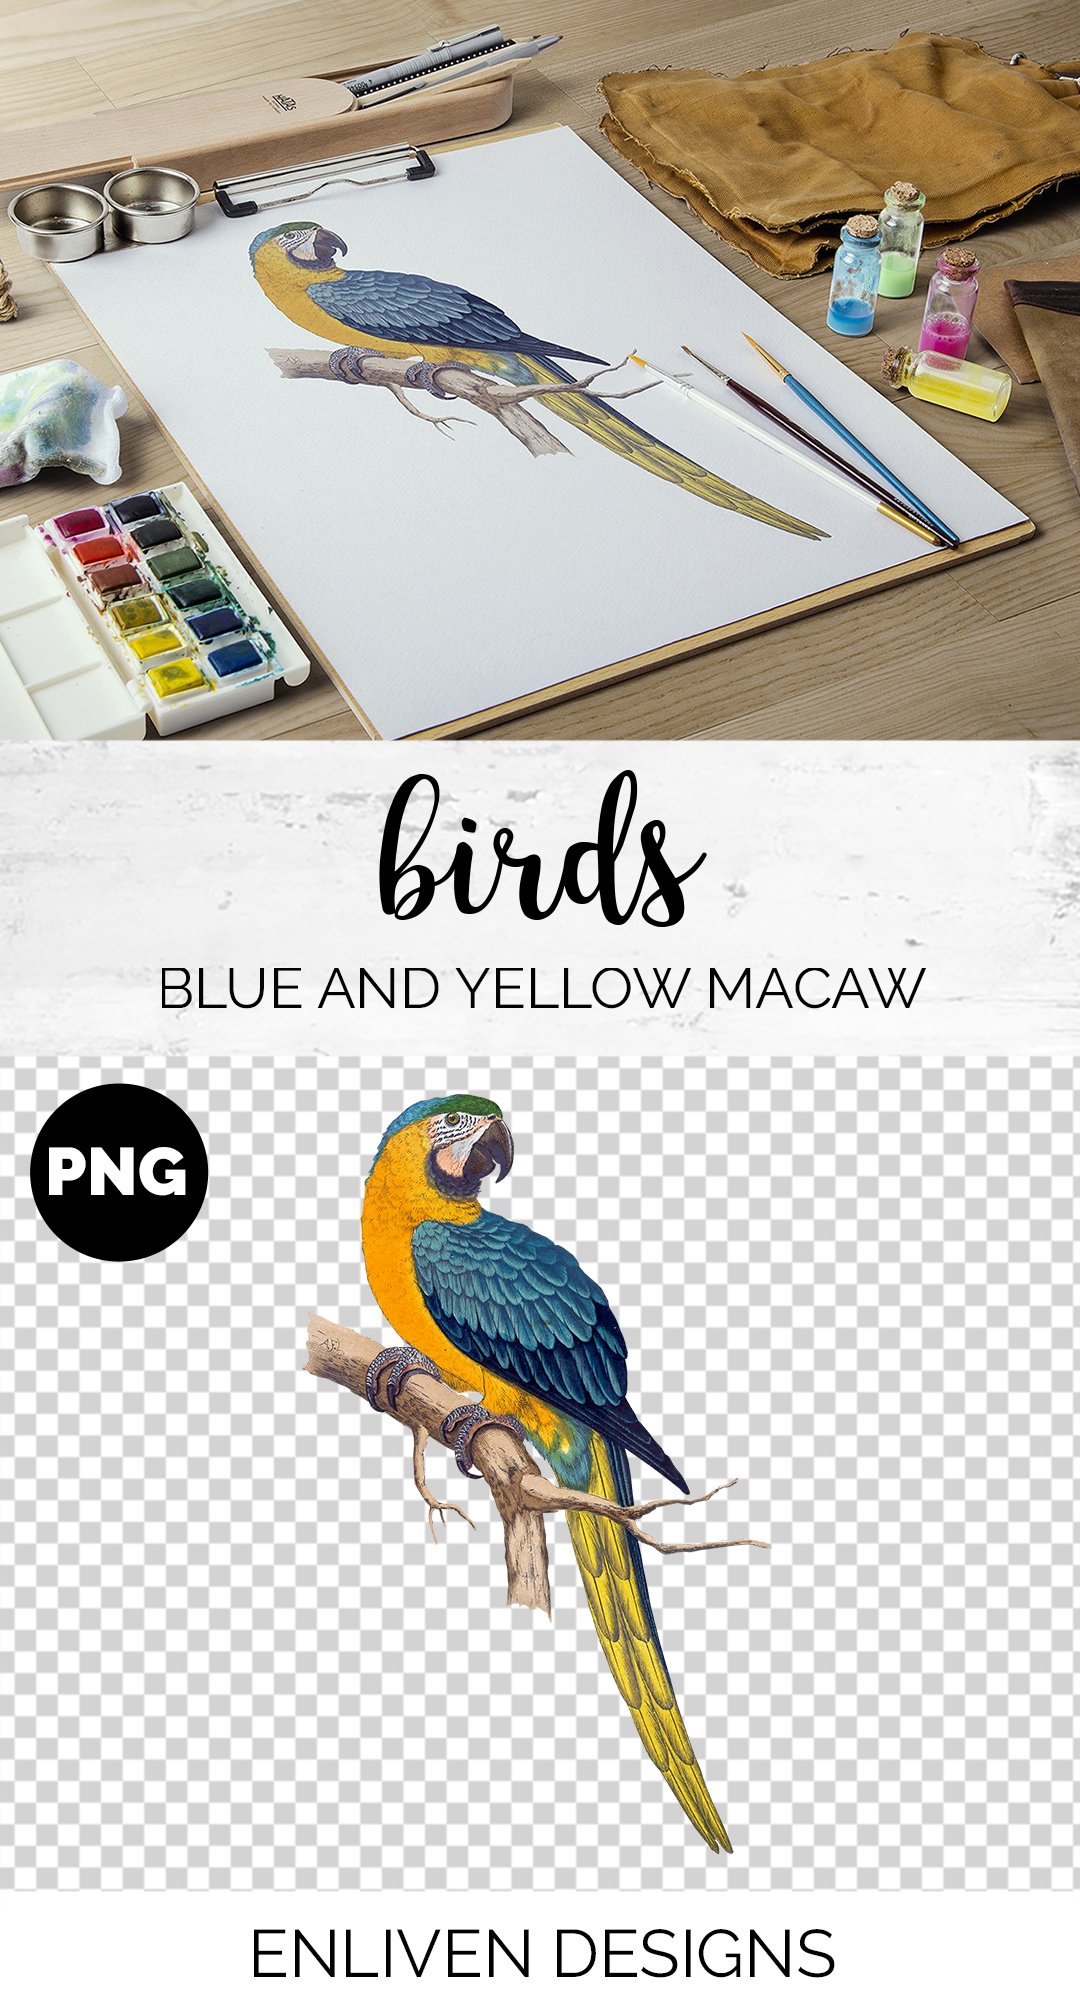 Parrot Blue and Yellow Macaw Parrot preview image.